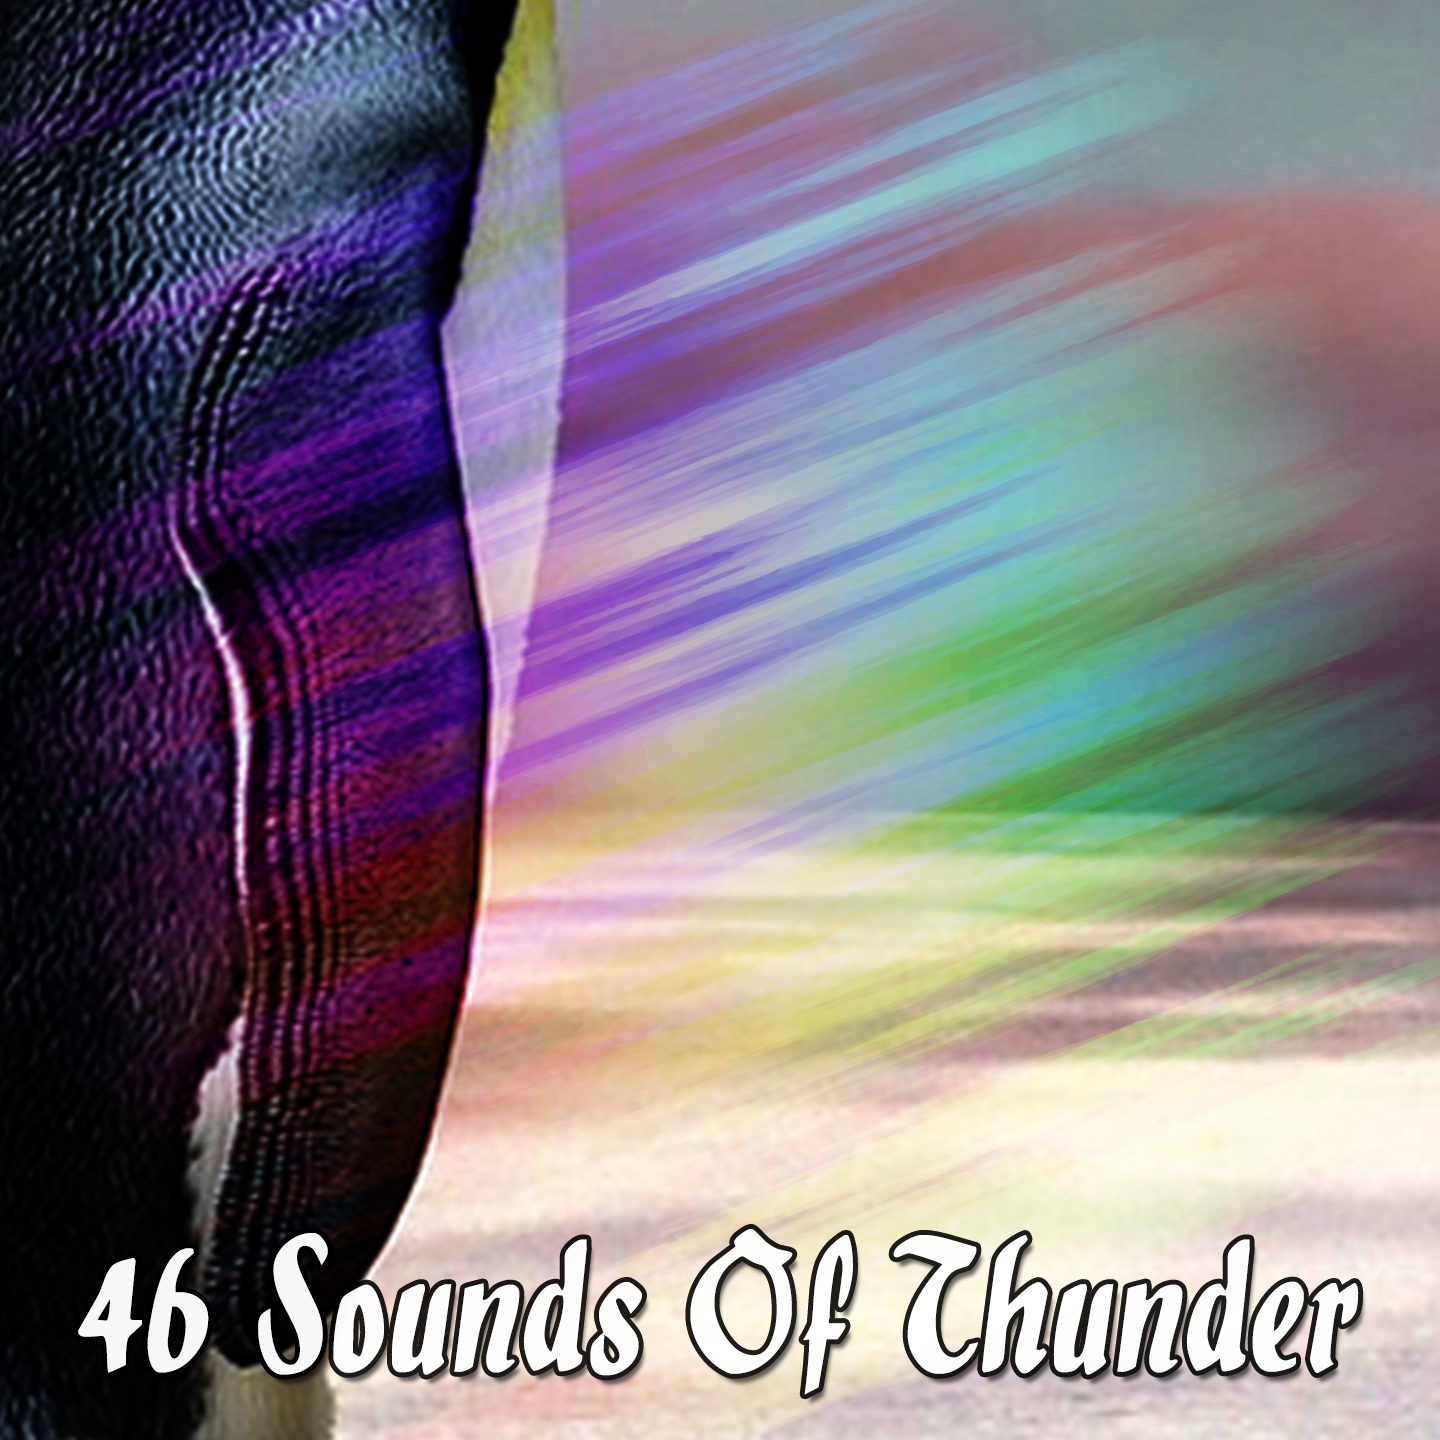 46 Sounds Of Thunder